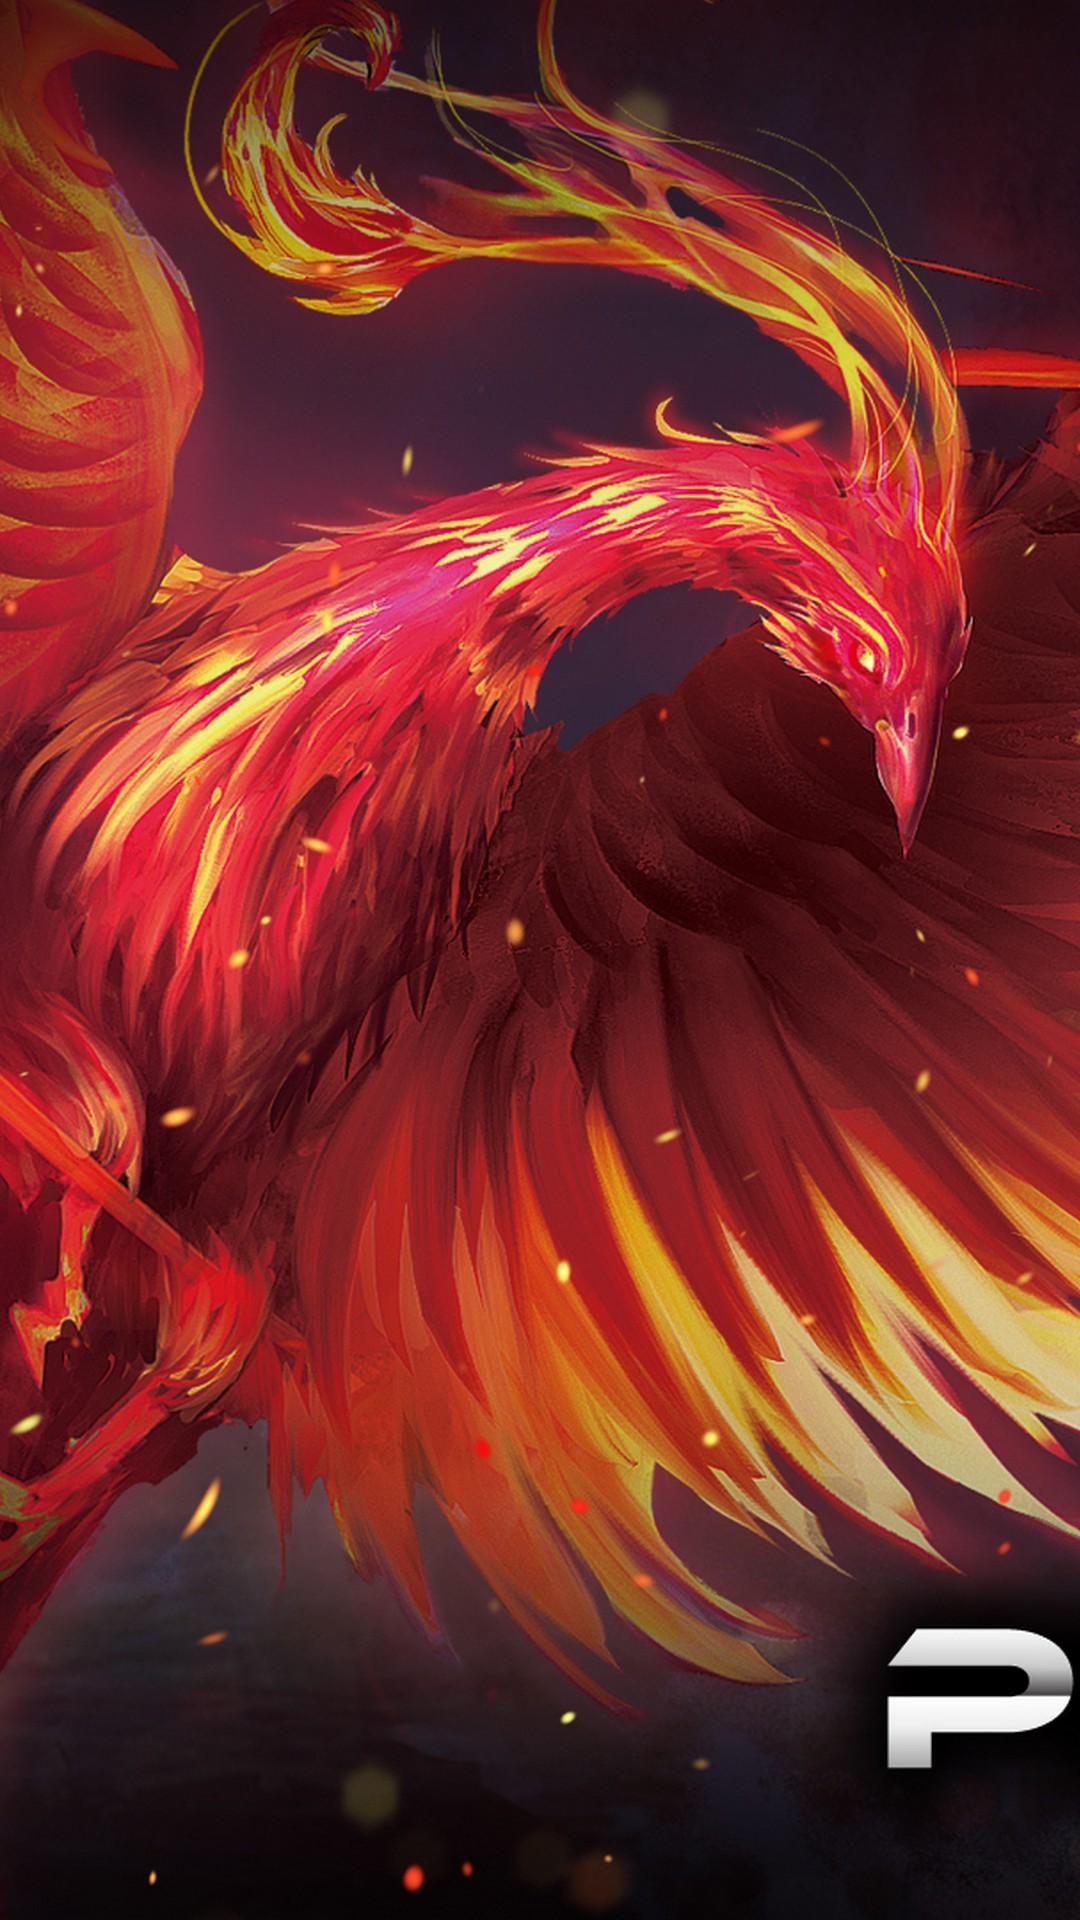 Android Wallpaper Phoenix Images with image resolution 1080x1920 pixel. You can make this wallpaper for your Android backgrounds, Tablet, Smartphones Screensavers and Mobile Phone Lock Screen